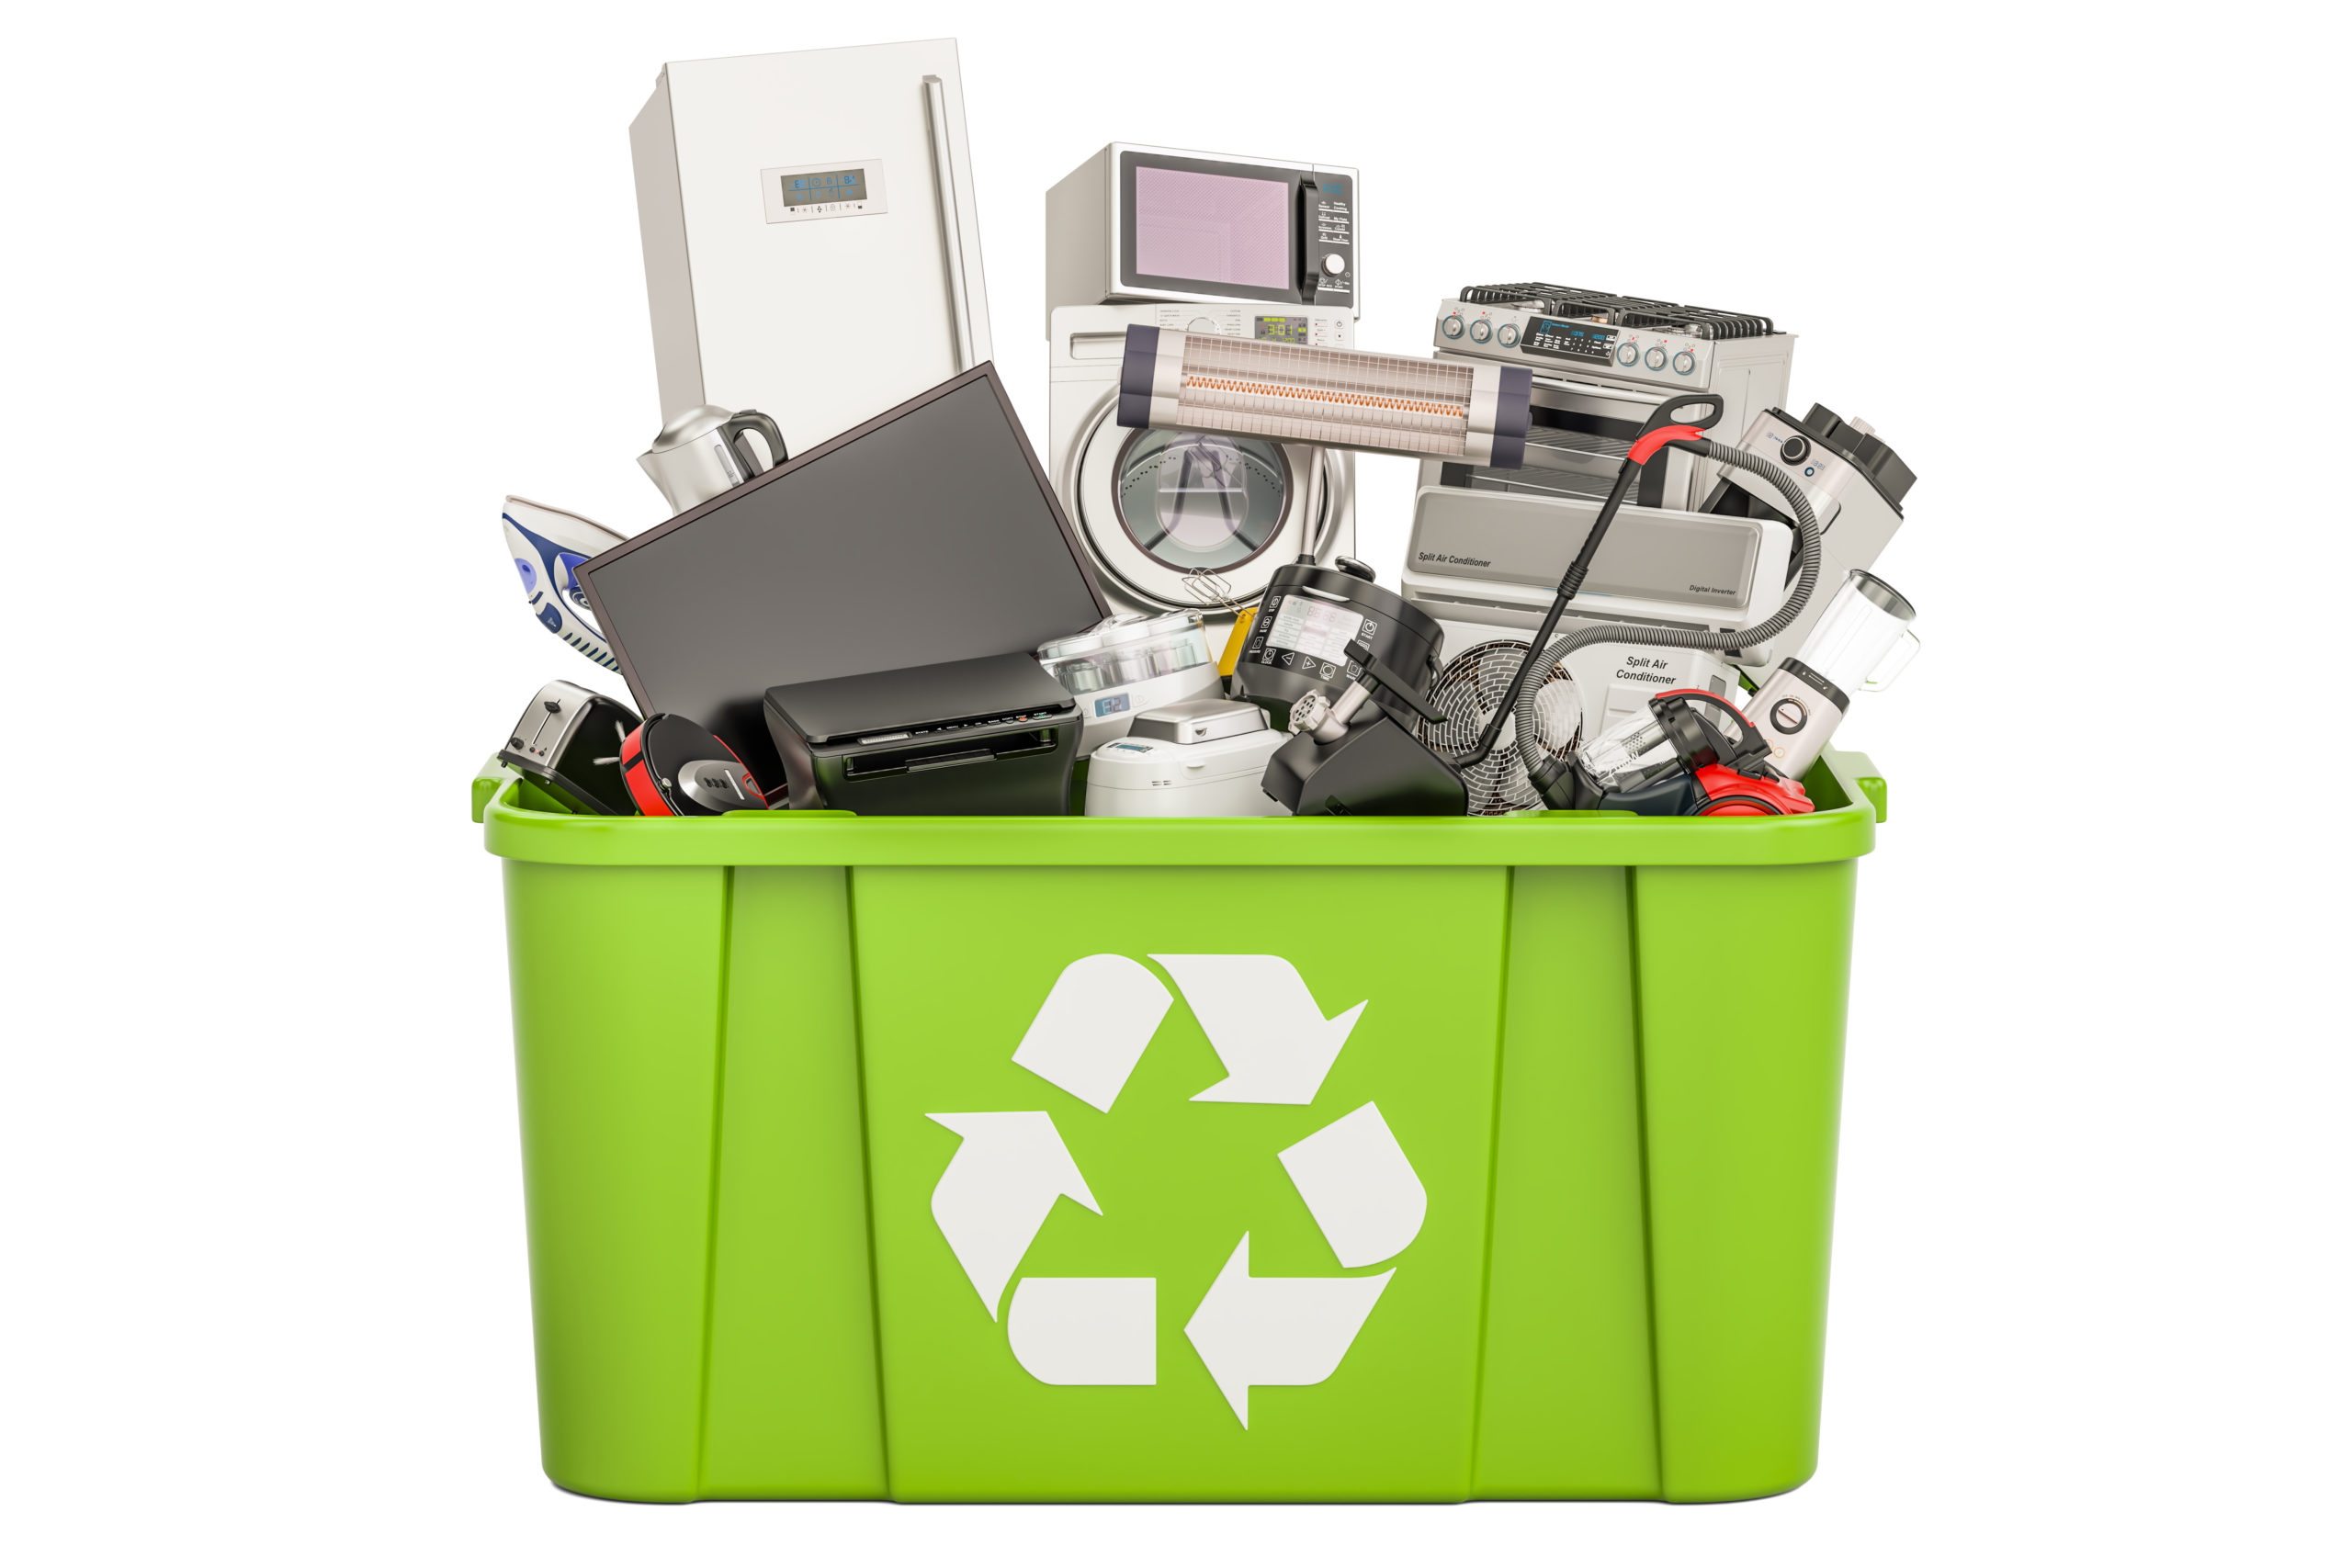 4 Surprising Benefits of Recycling Old Electronic Devices - Bread of Life  Community Services